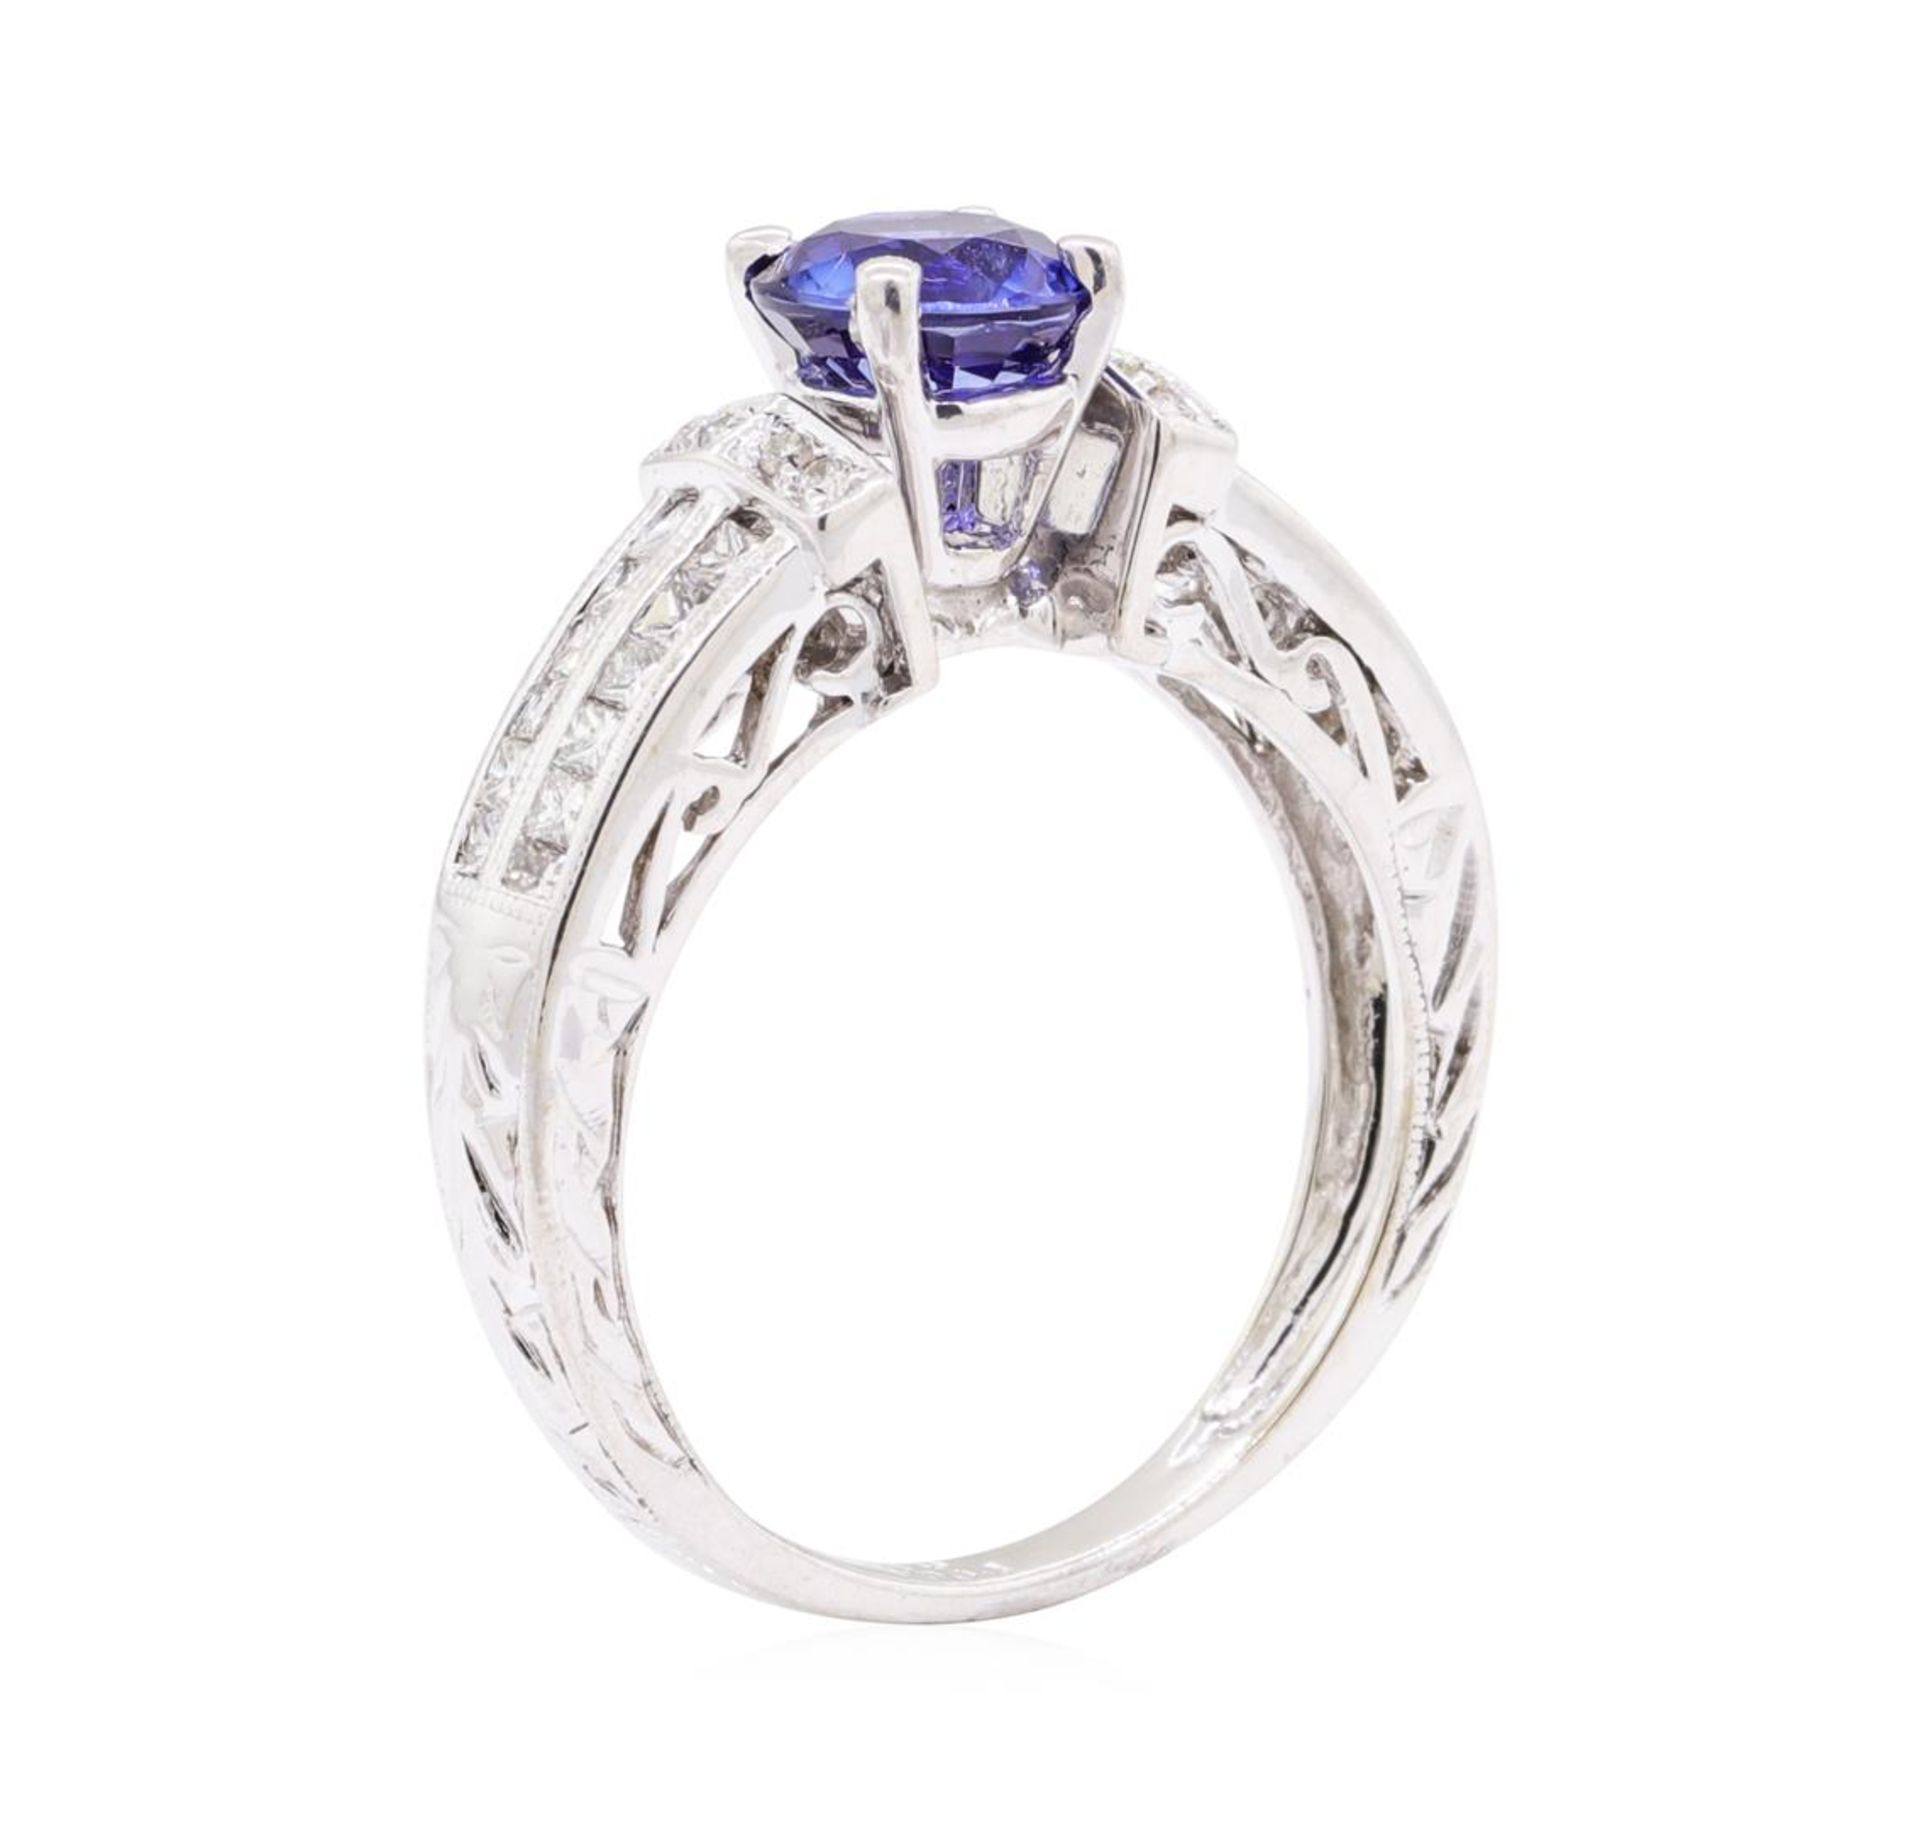 1.36 ctw Sapphire and Diamond Ring - 14KT White Gold - Image 4 of 4